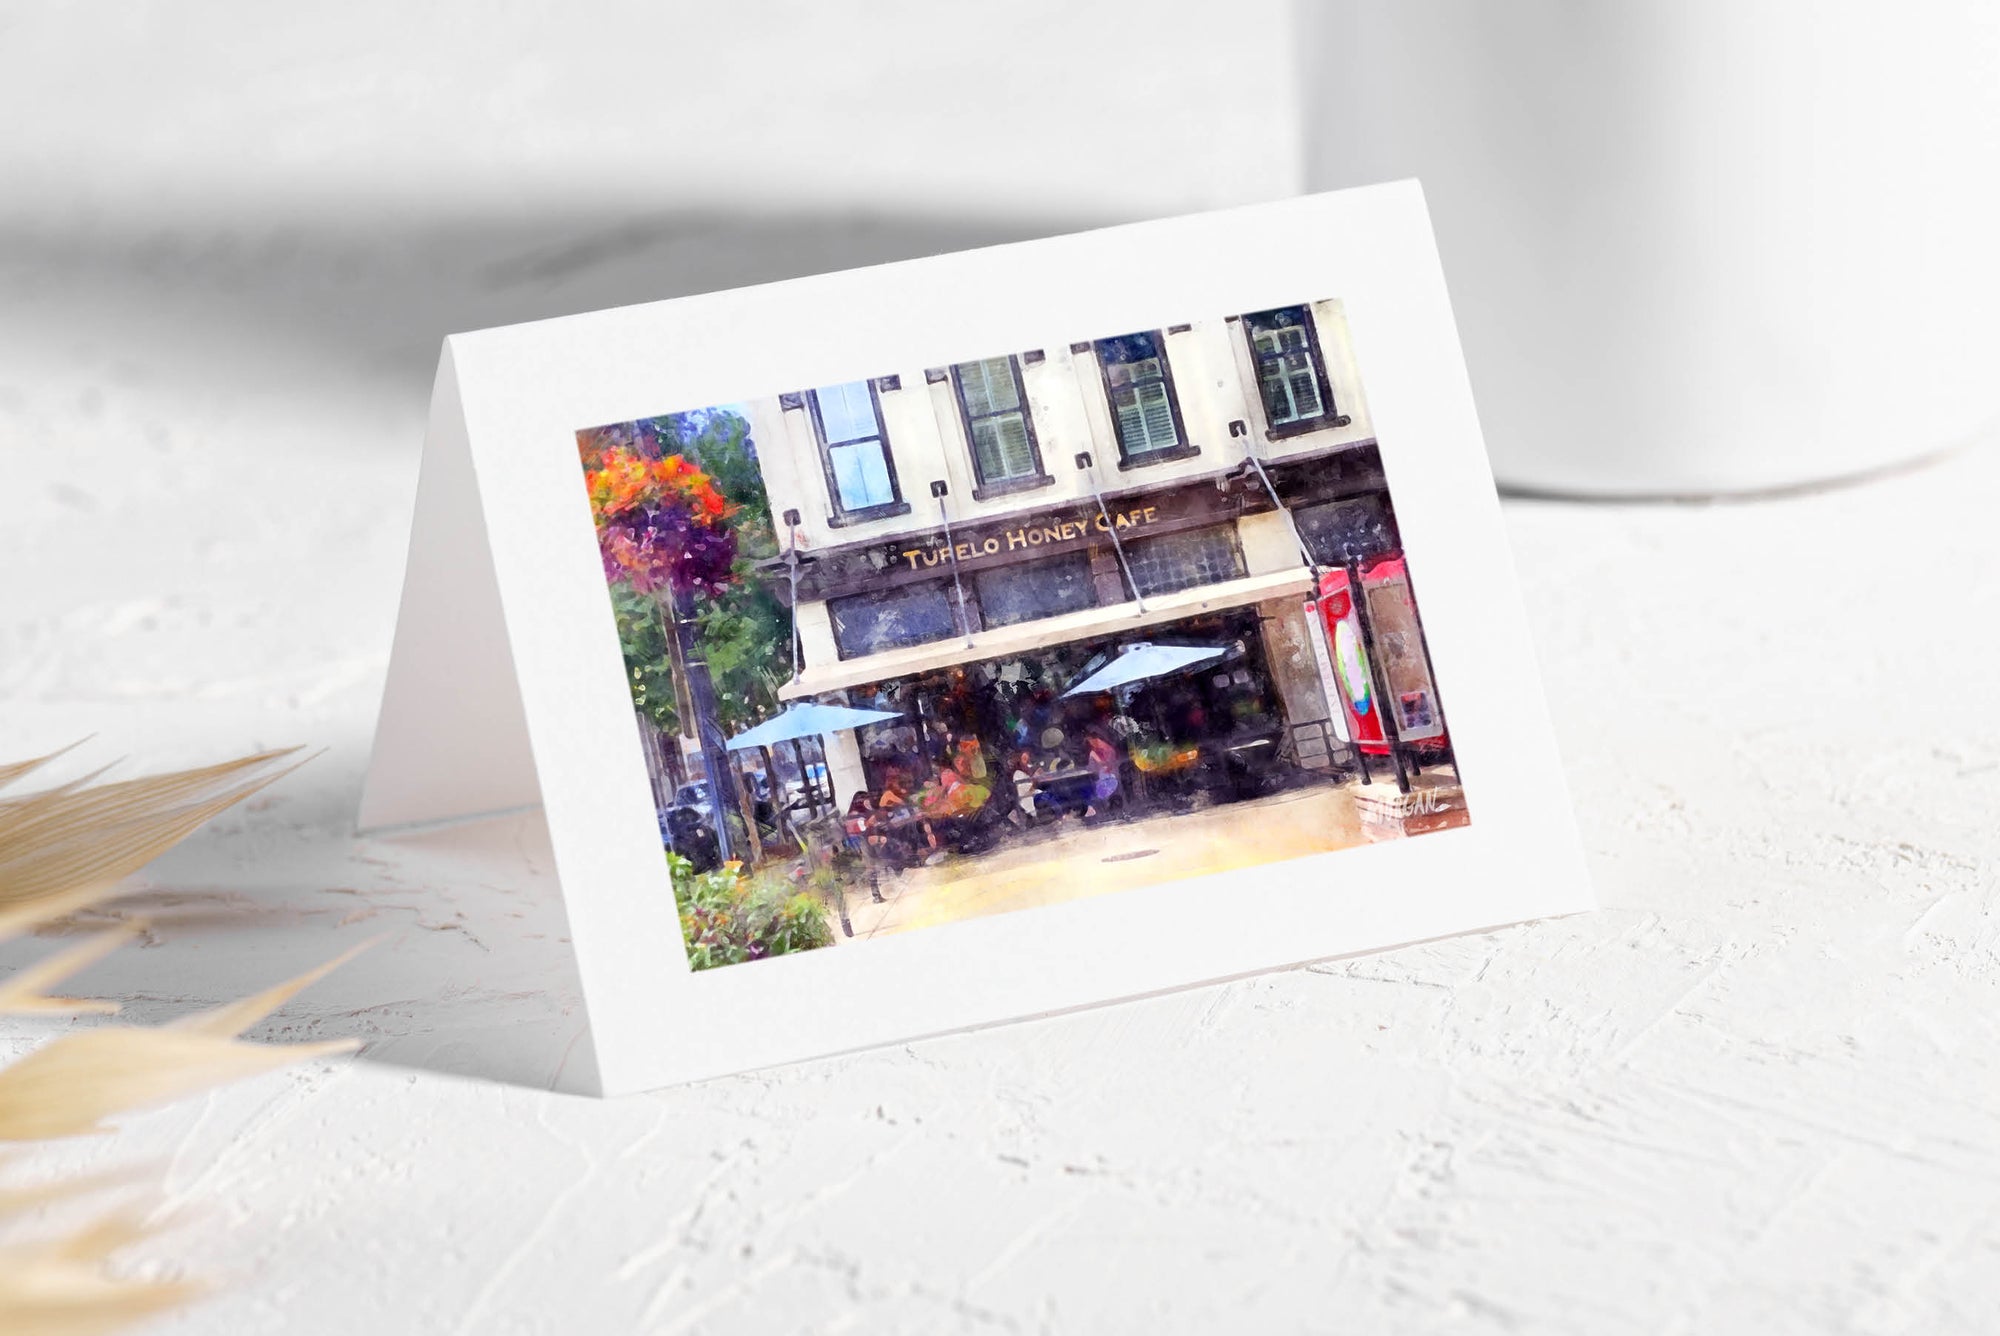 Tupelo Honey in Market Square Downtown Knoxville Greeting Cards